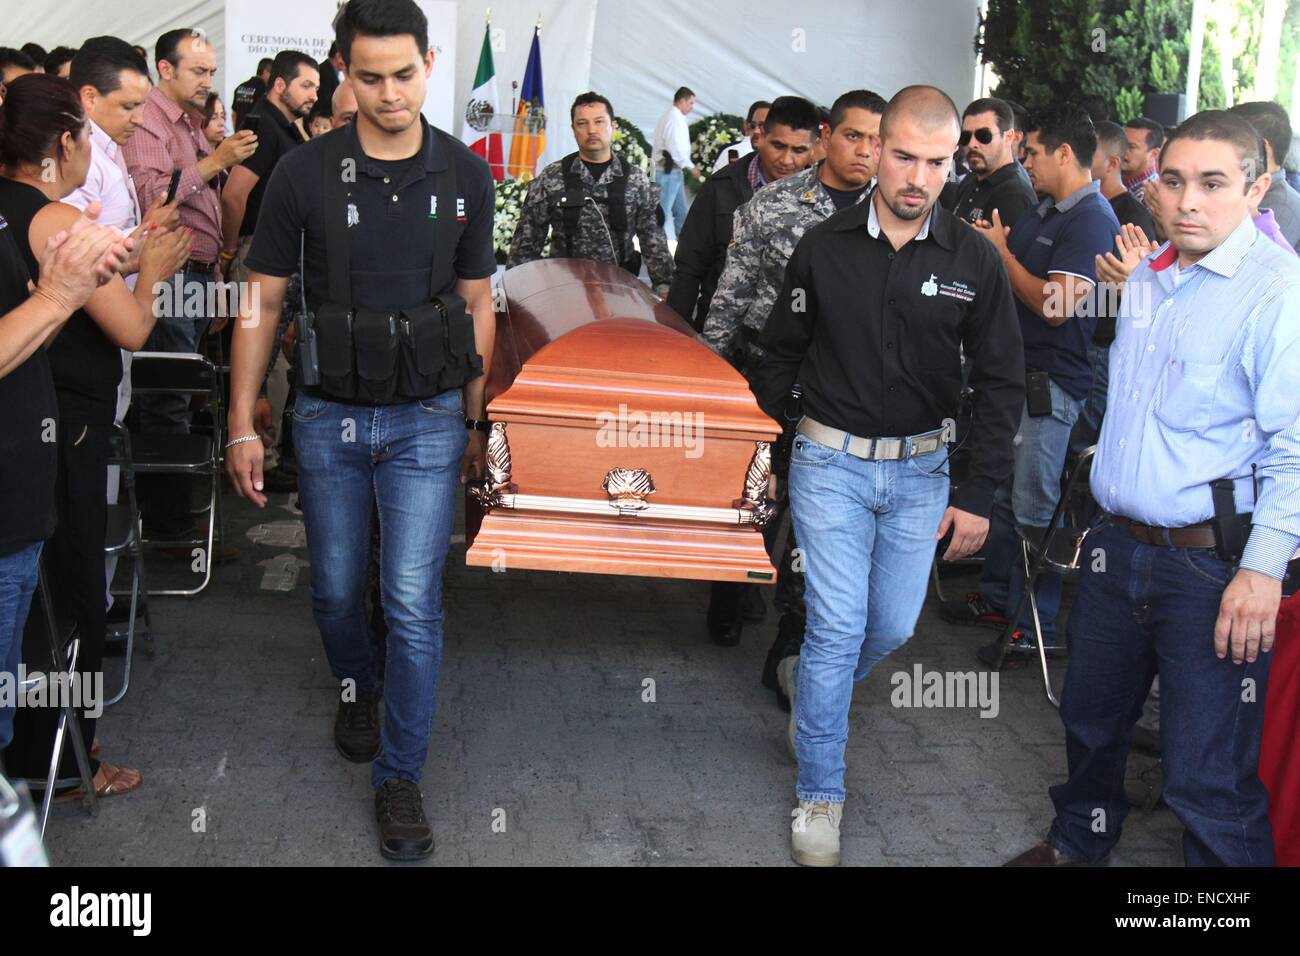 Jalisco, Mexico. 2nd May, 2015. People carry the coffin of Mario Alberto Jorge Olivares Castorena, a policeman that died in the violent acts on Friday, during his funeral in Guadalajara, Jalisco state, Mexico, on May 2, 2015. According to local press, At least seven people were killed and 19 others injured during an outbreak of violence early Friday in parts of Mexico's western state of Jalisco, where local government launched an operation against a drug cartel. © Str/Xinhua/Alamy Live News Stock Photo